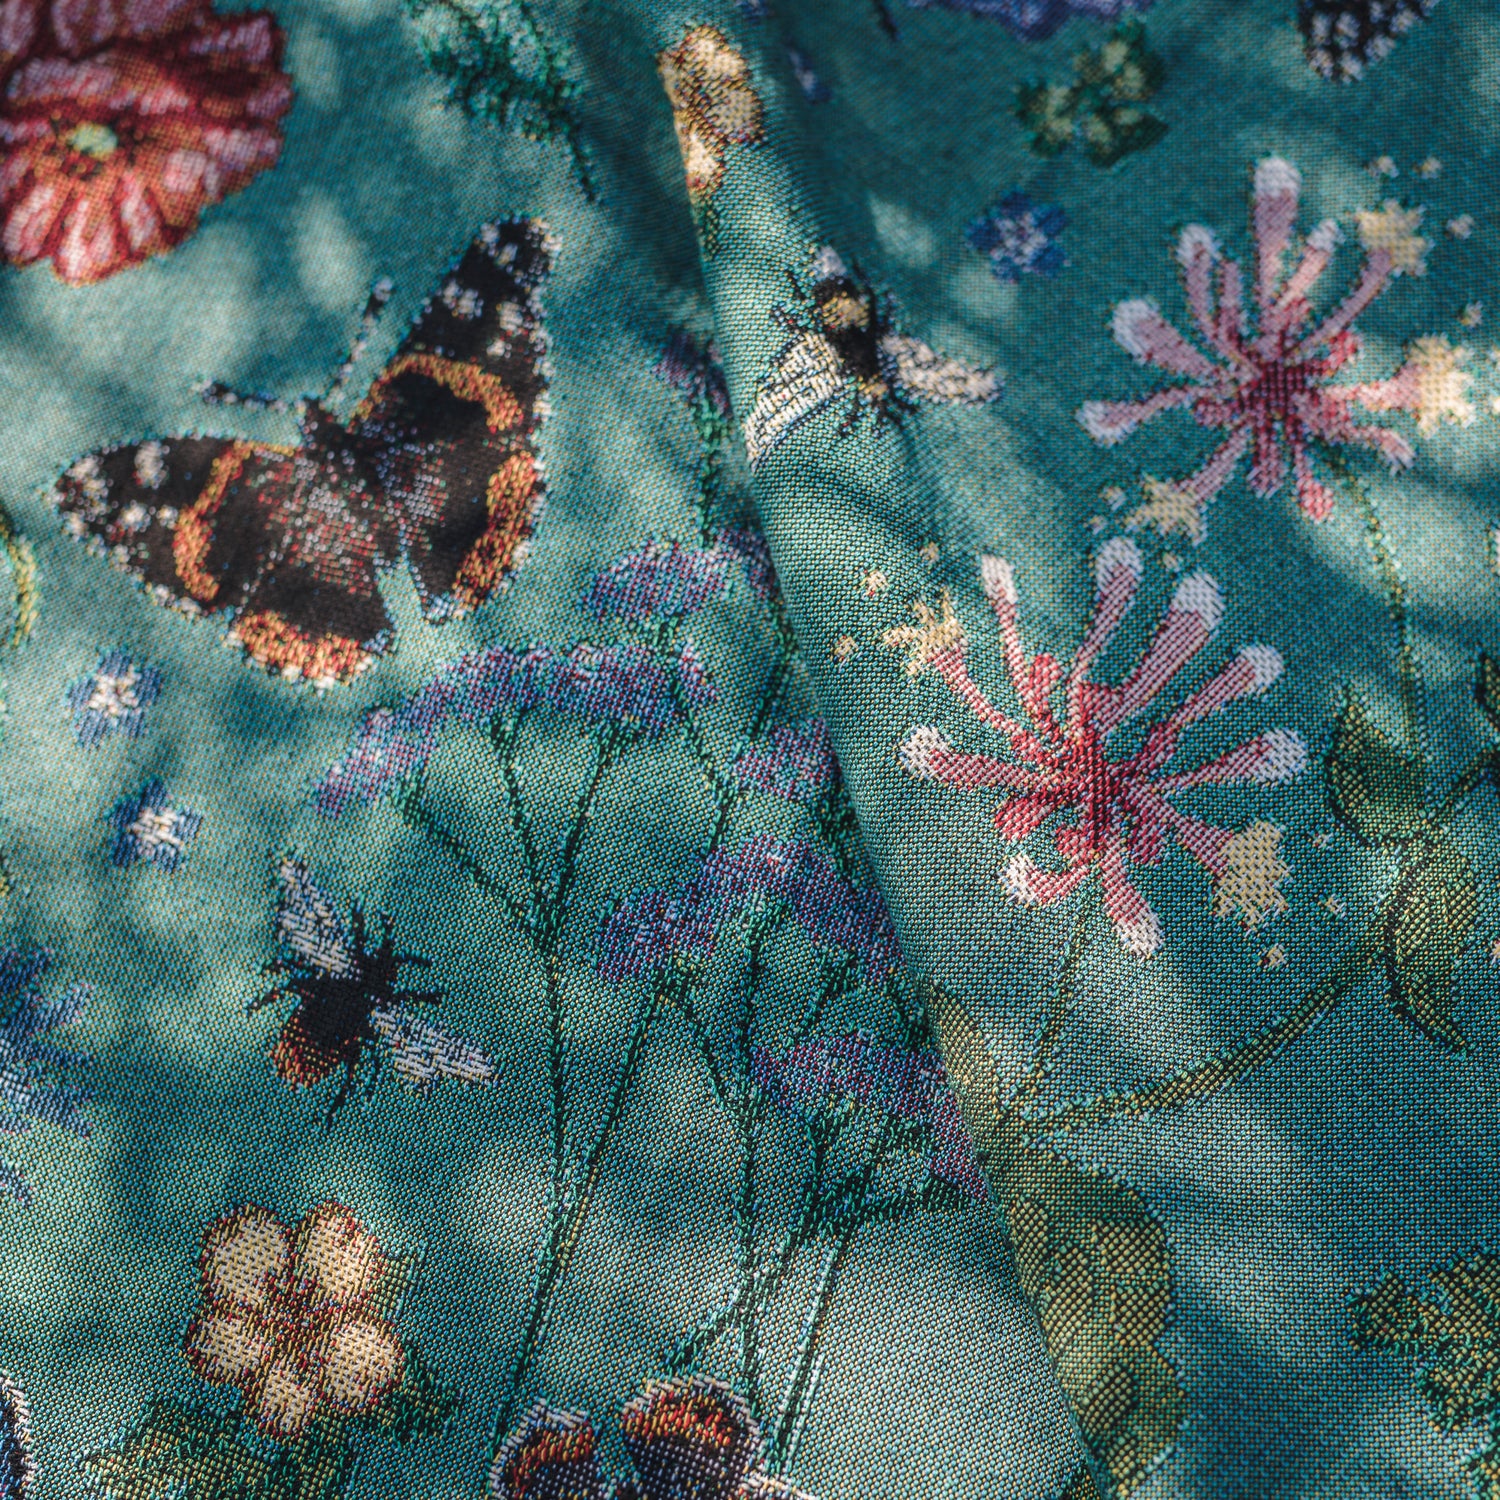 butterfly and flower details on woven green blanket in dappled sunlight